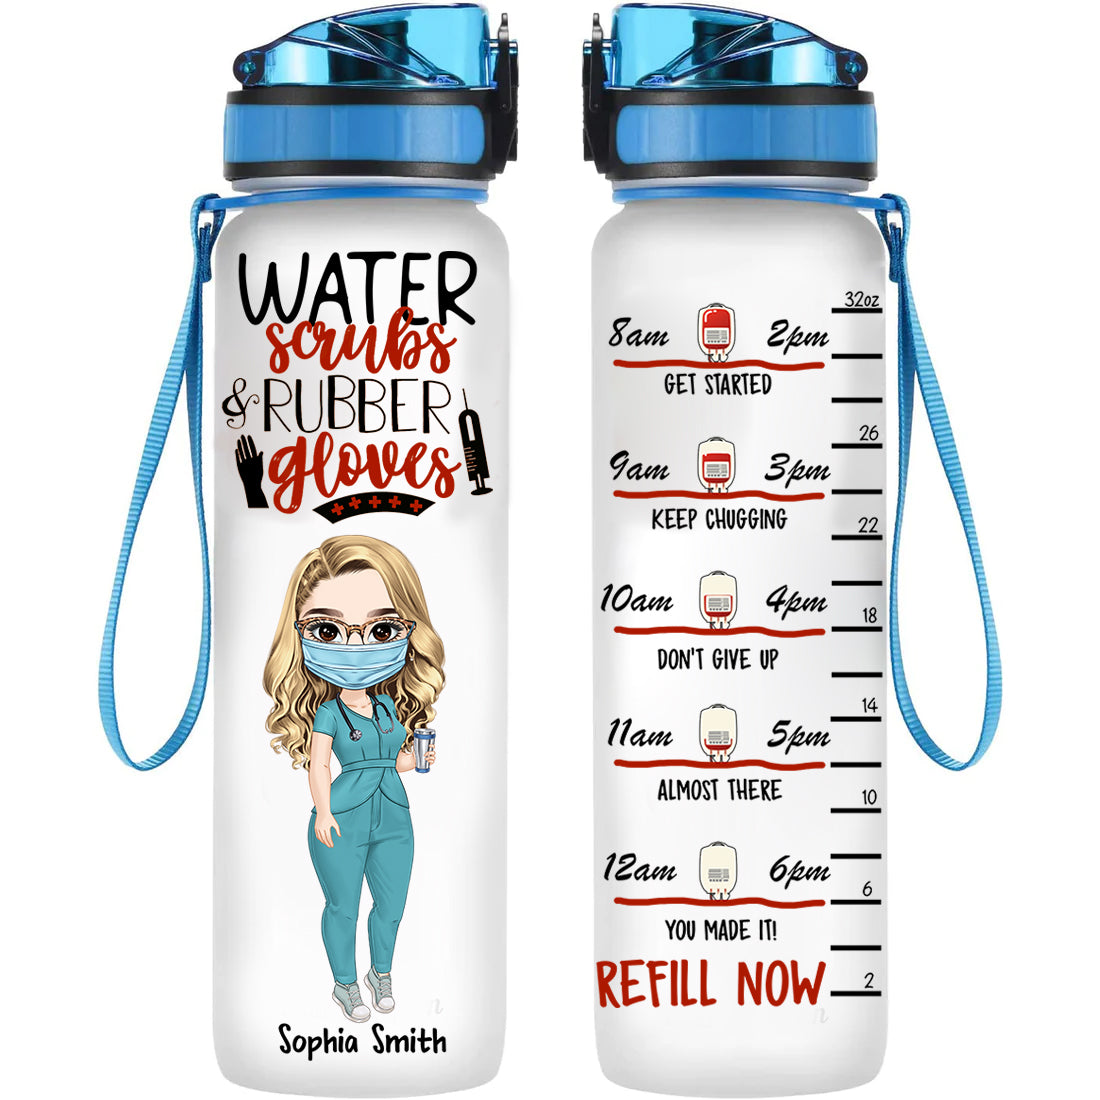 Water Scrubs And Rubber Gloves, Custom Nurse Appearance And Name, Personalized Tracker Bottle